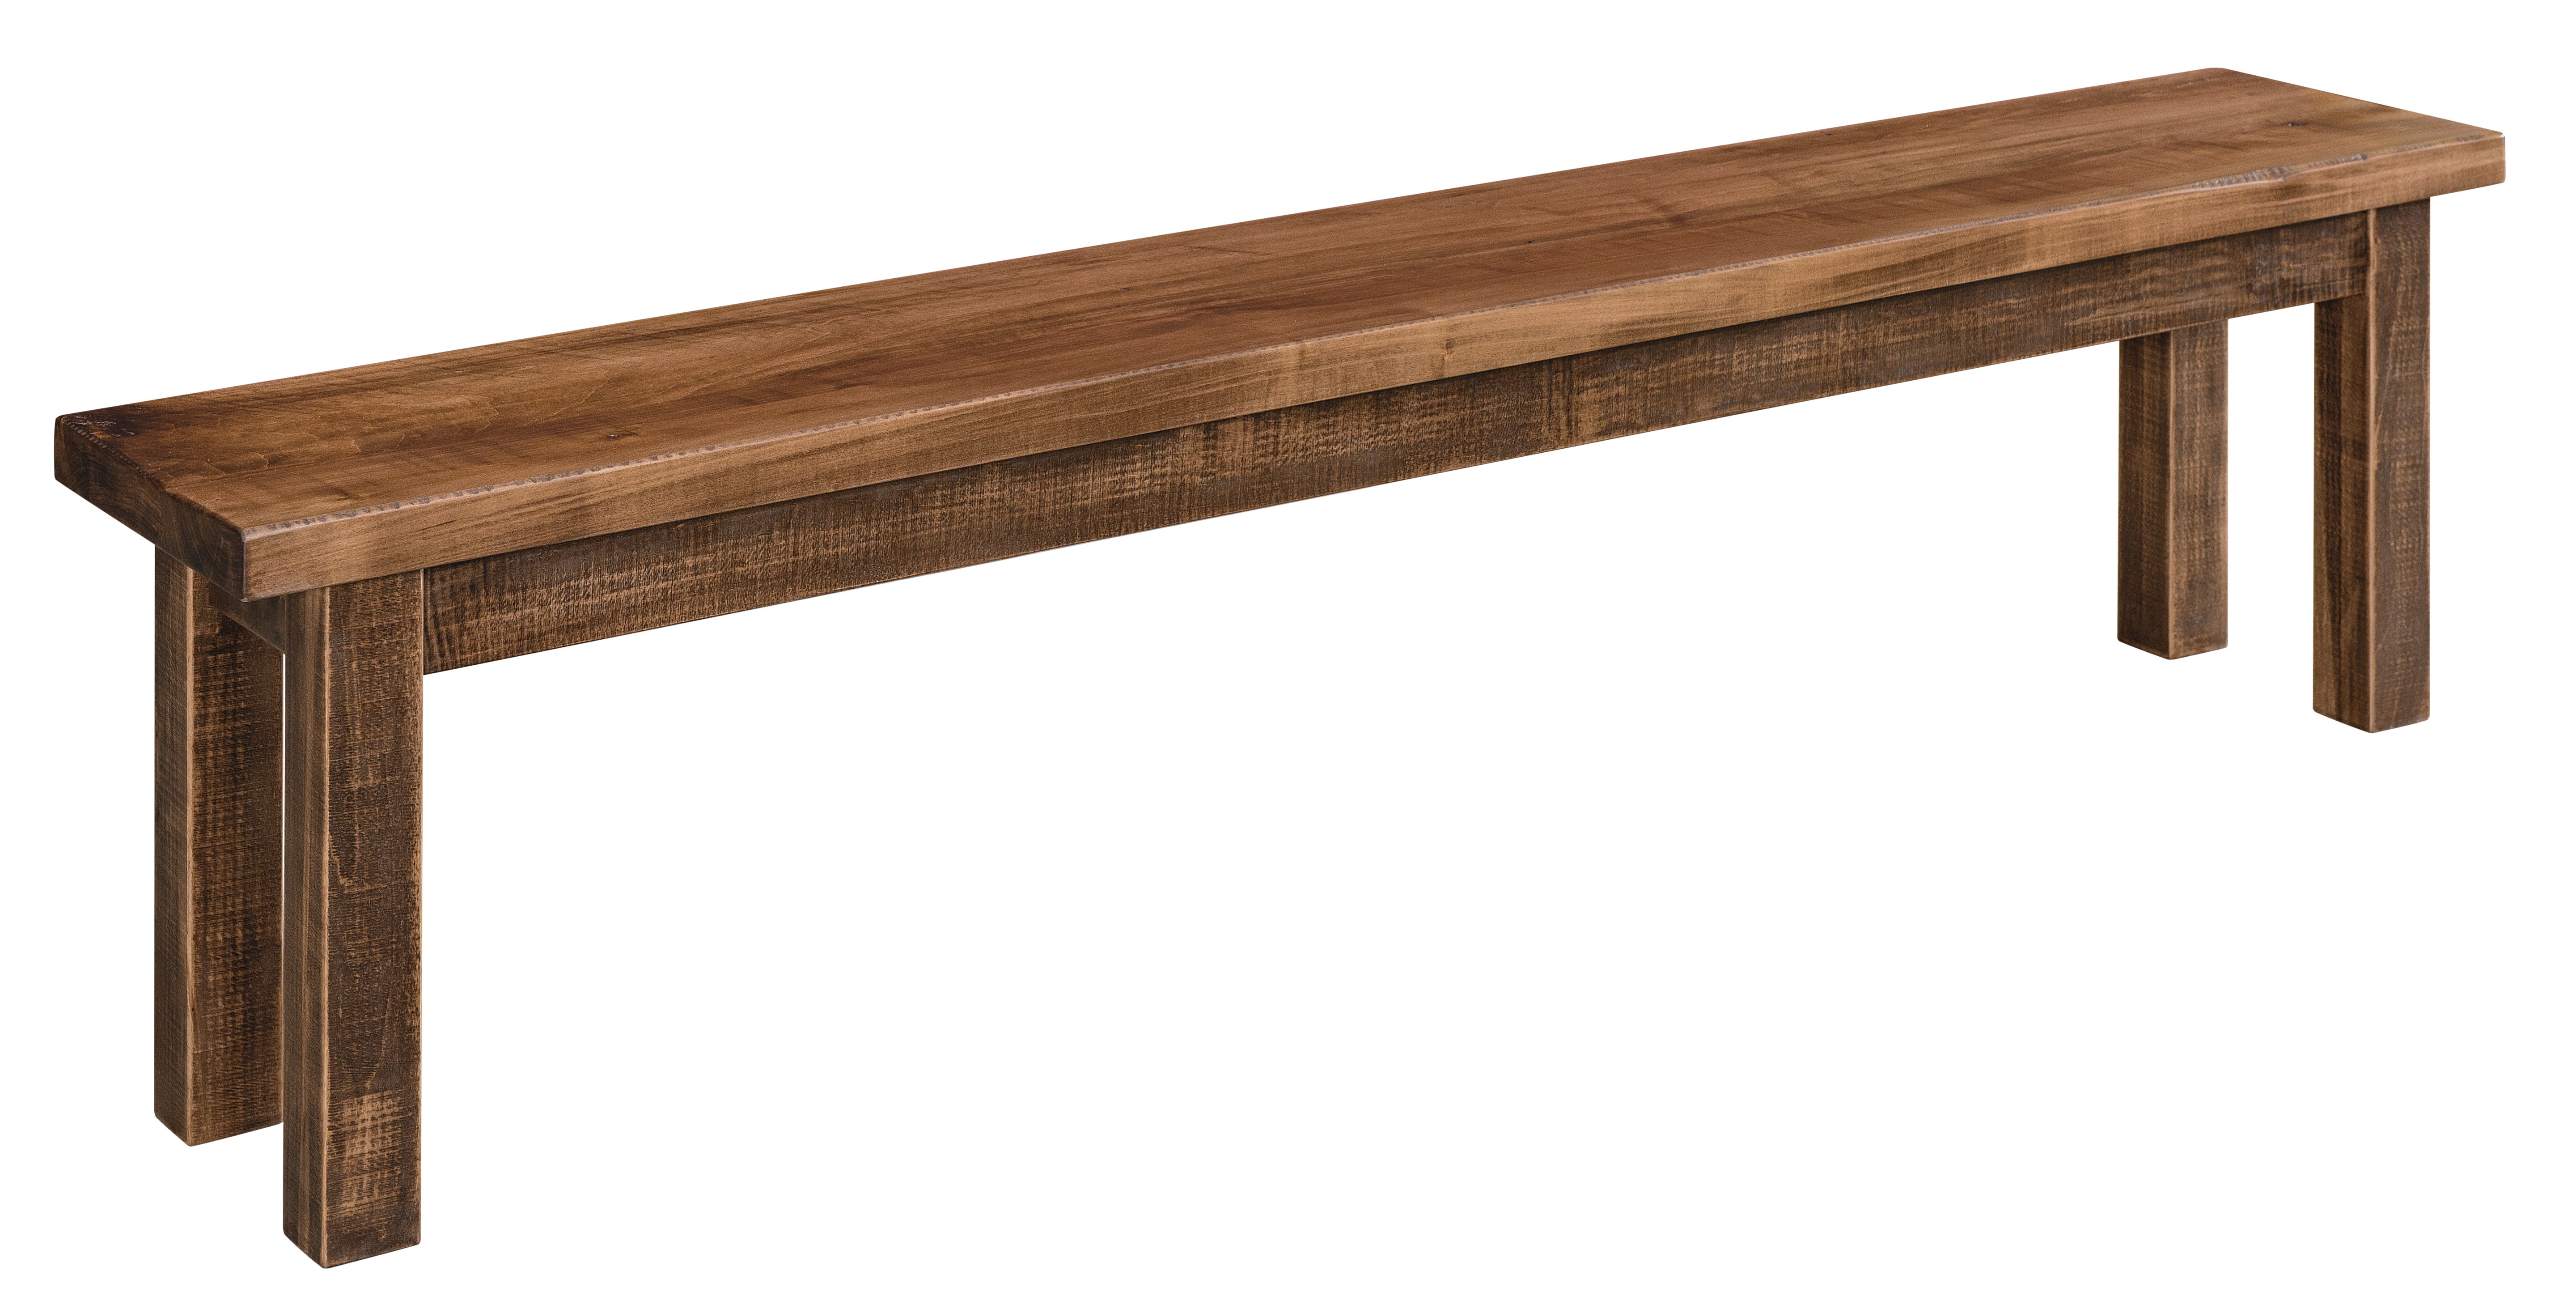 amish santa fe bench shown in rough sawn wormy maple with an almond stain 